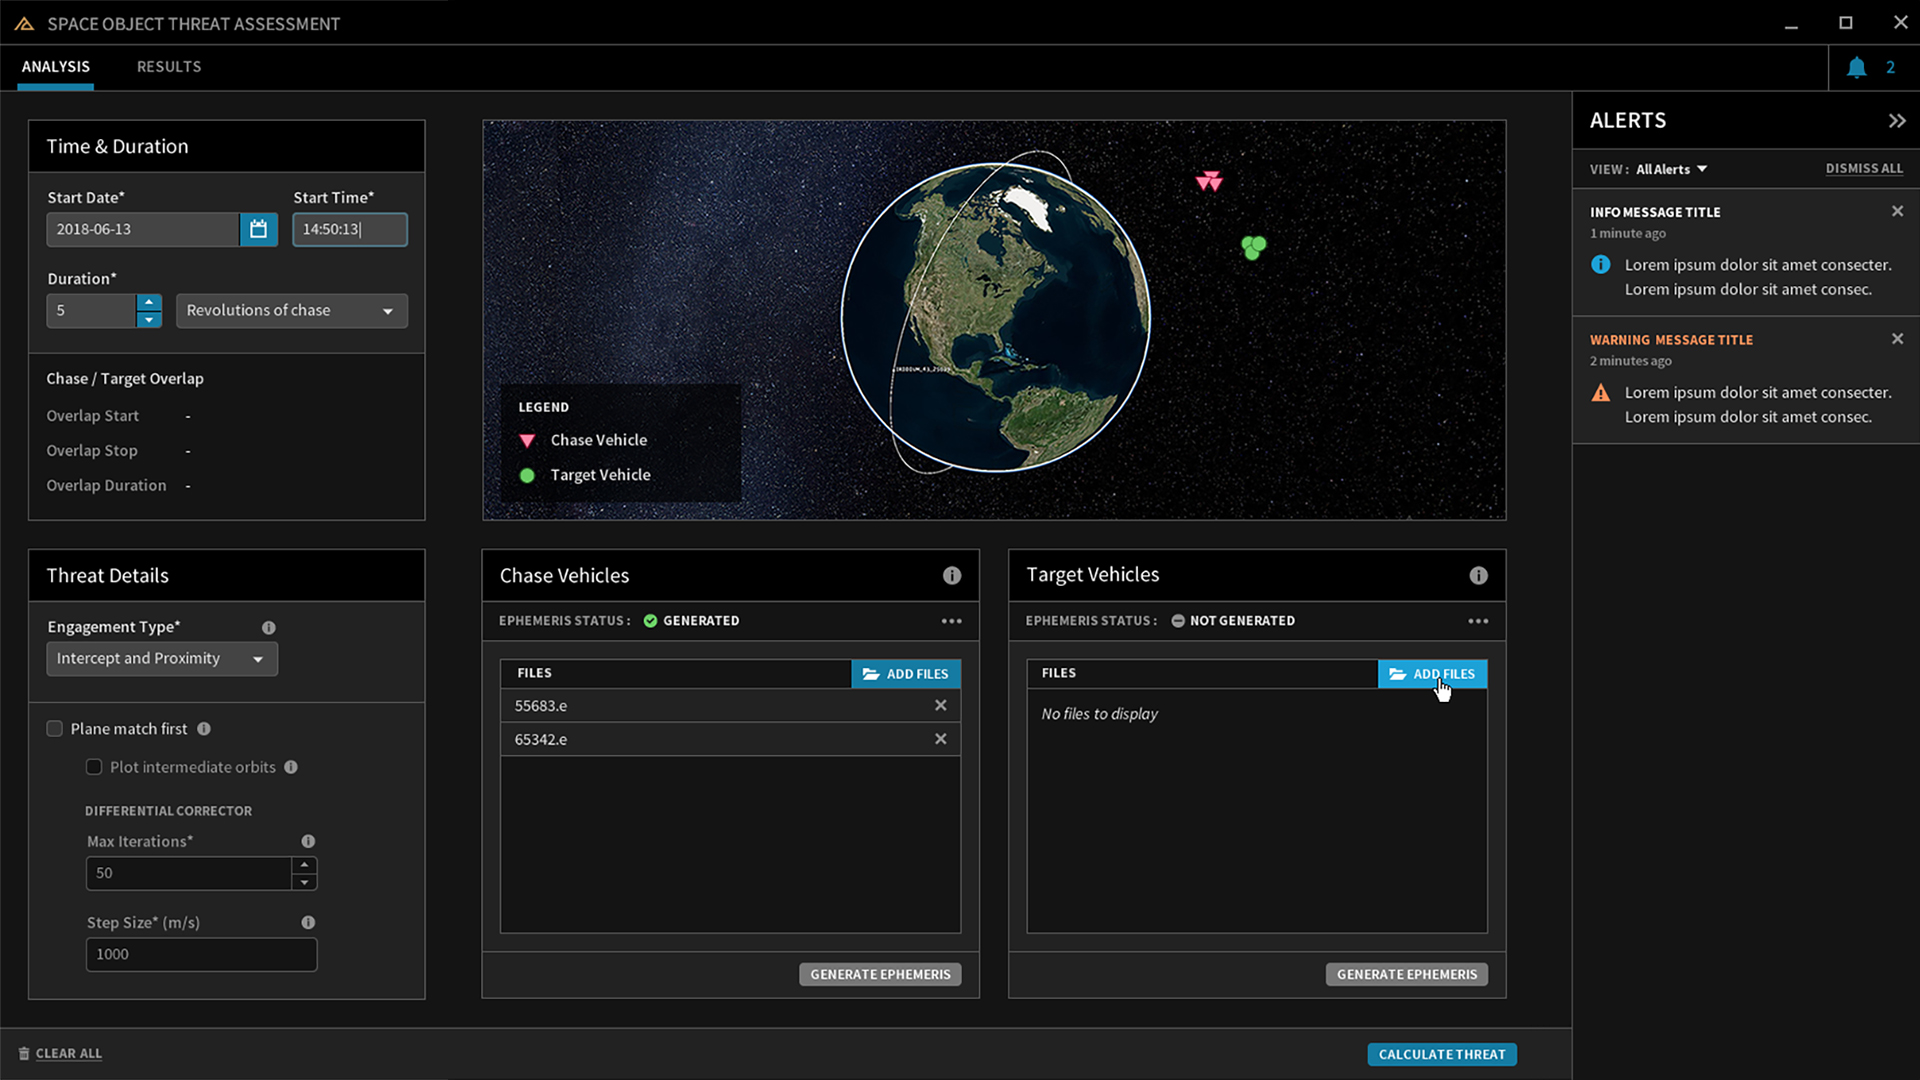 Picture of COMSPOC's Space Object Threat Assessment (SOTA) dash panel detailing chase and target vehicles their engagement type and alerts. 